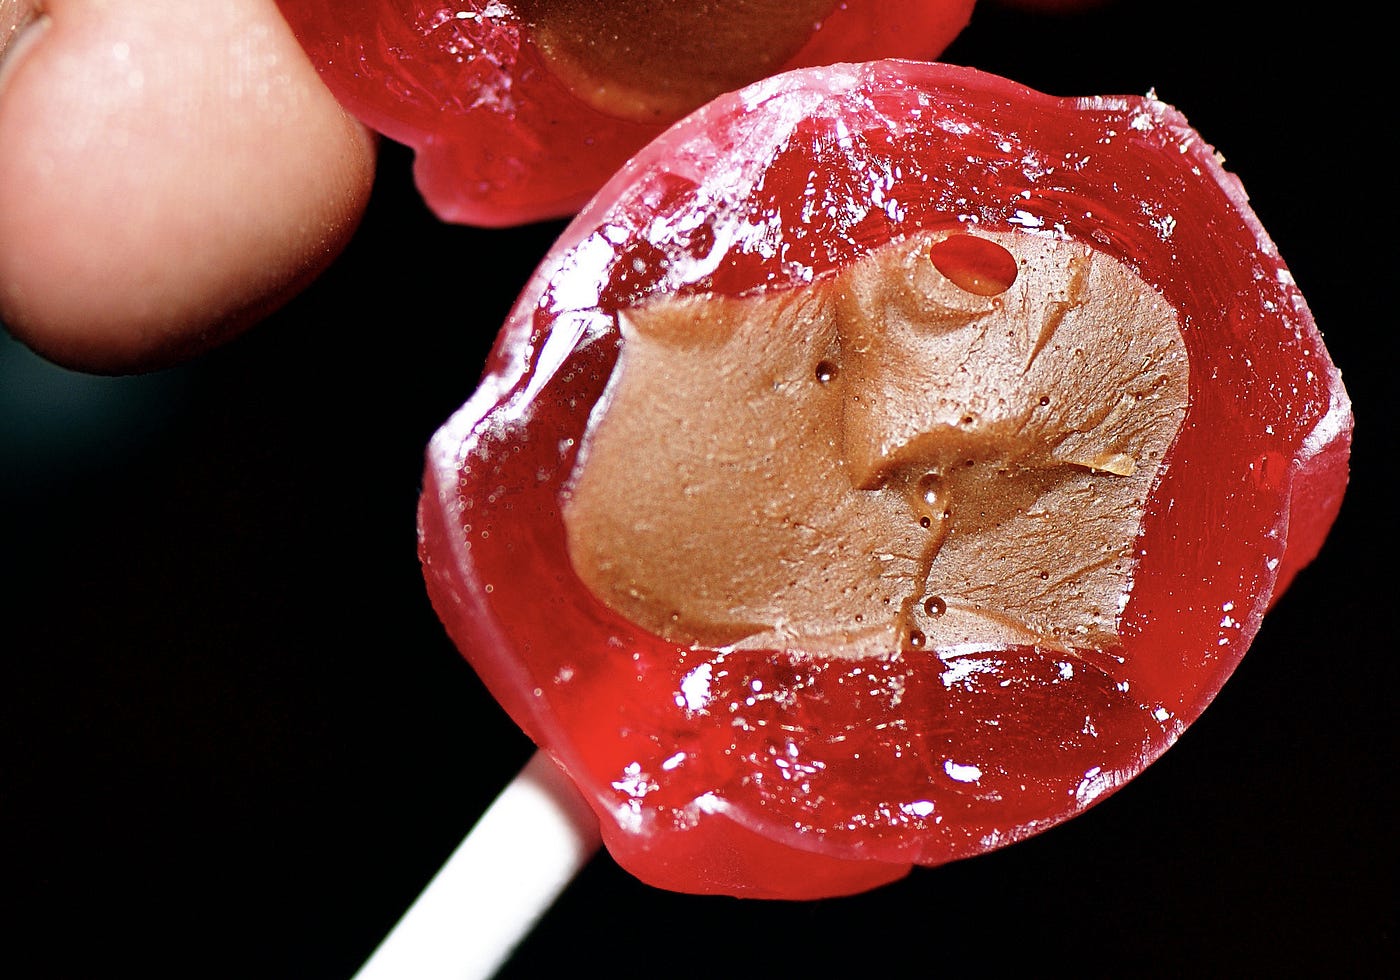 How many licks does it take to get to the center of a lollipop?